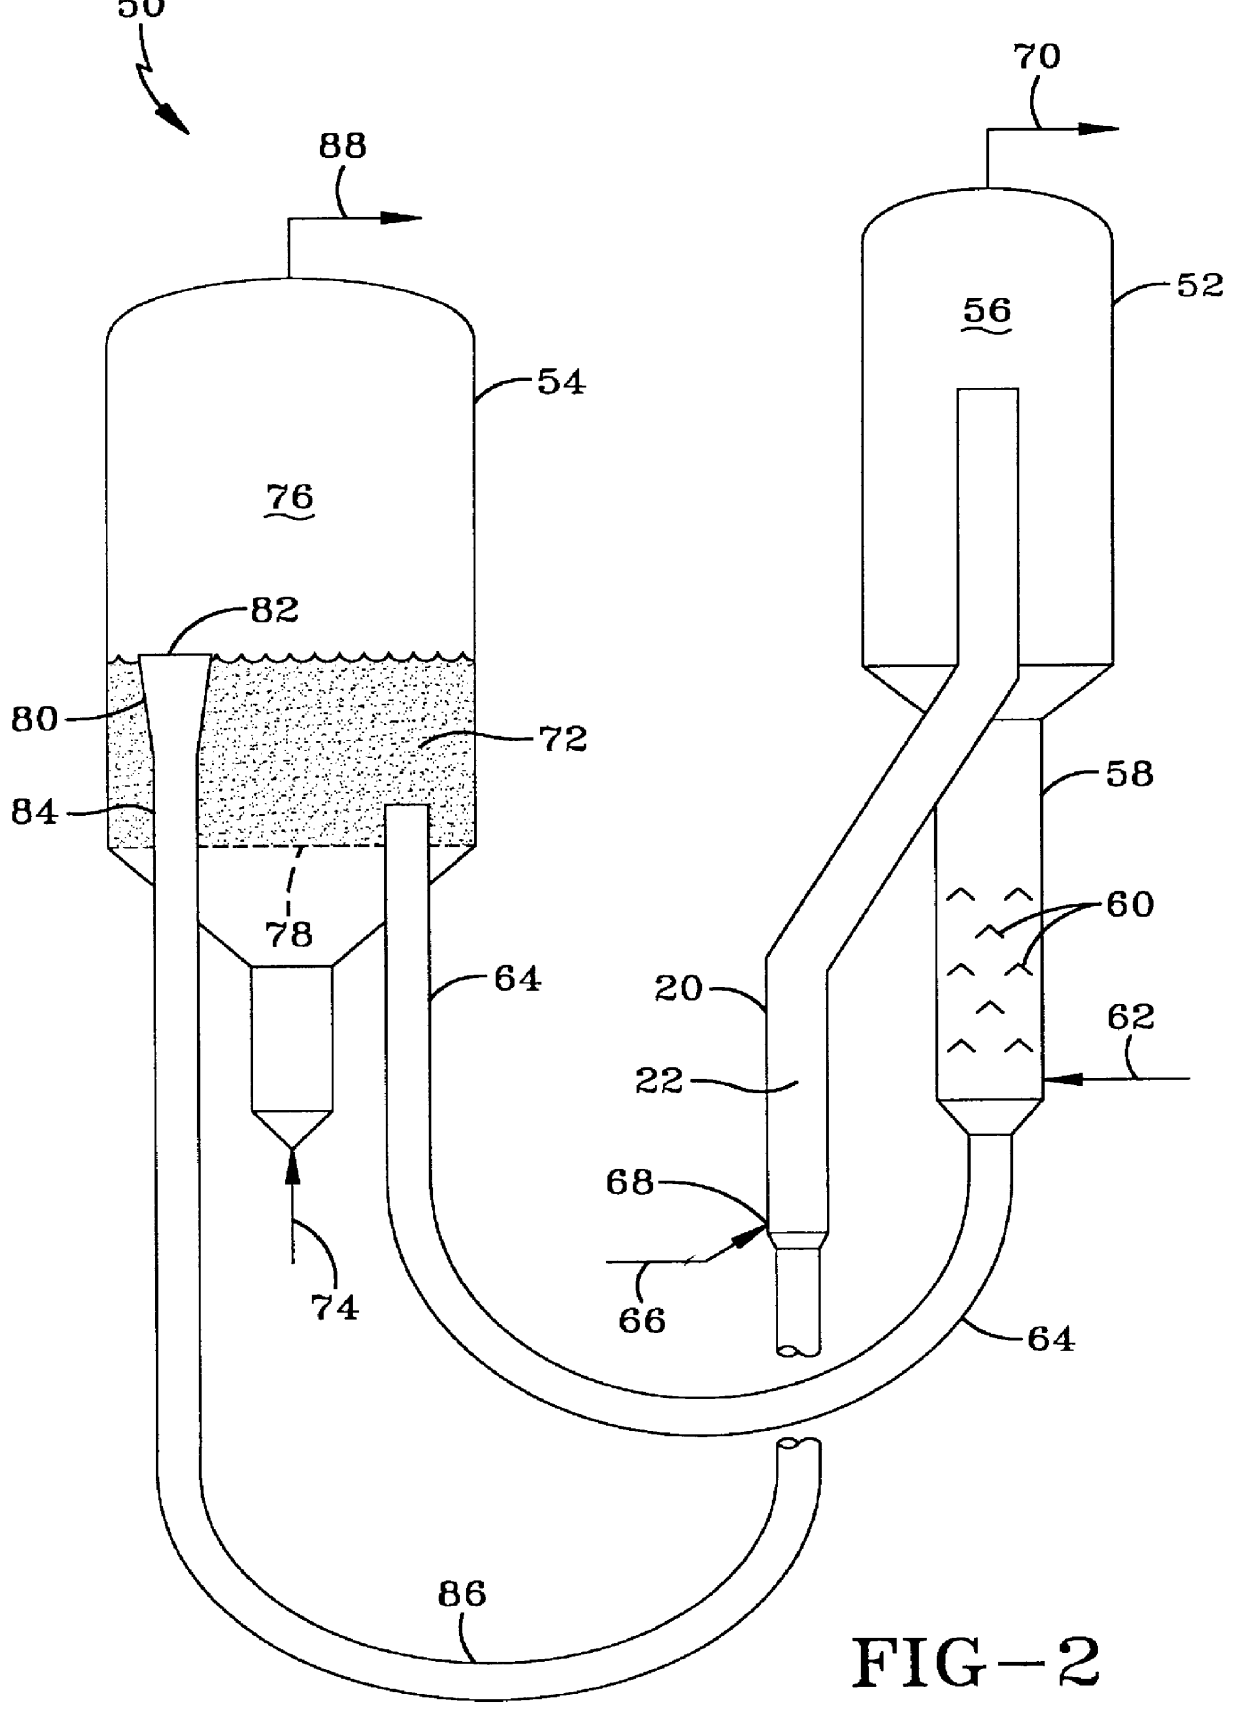 FCC feed injection using subcooled water sparging for enhanced feed atomization